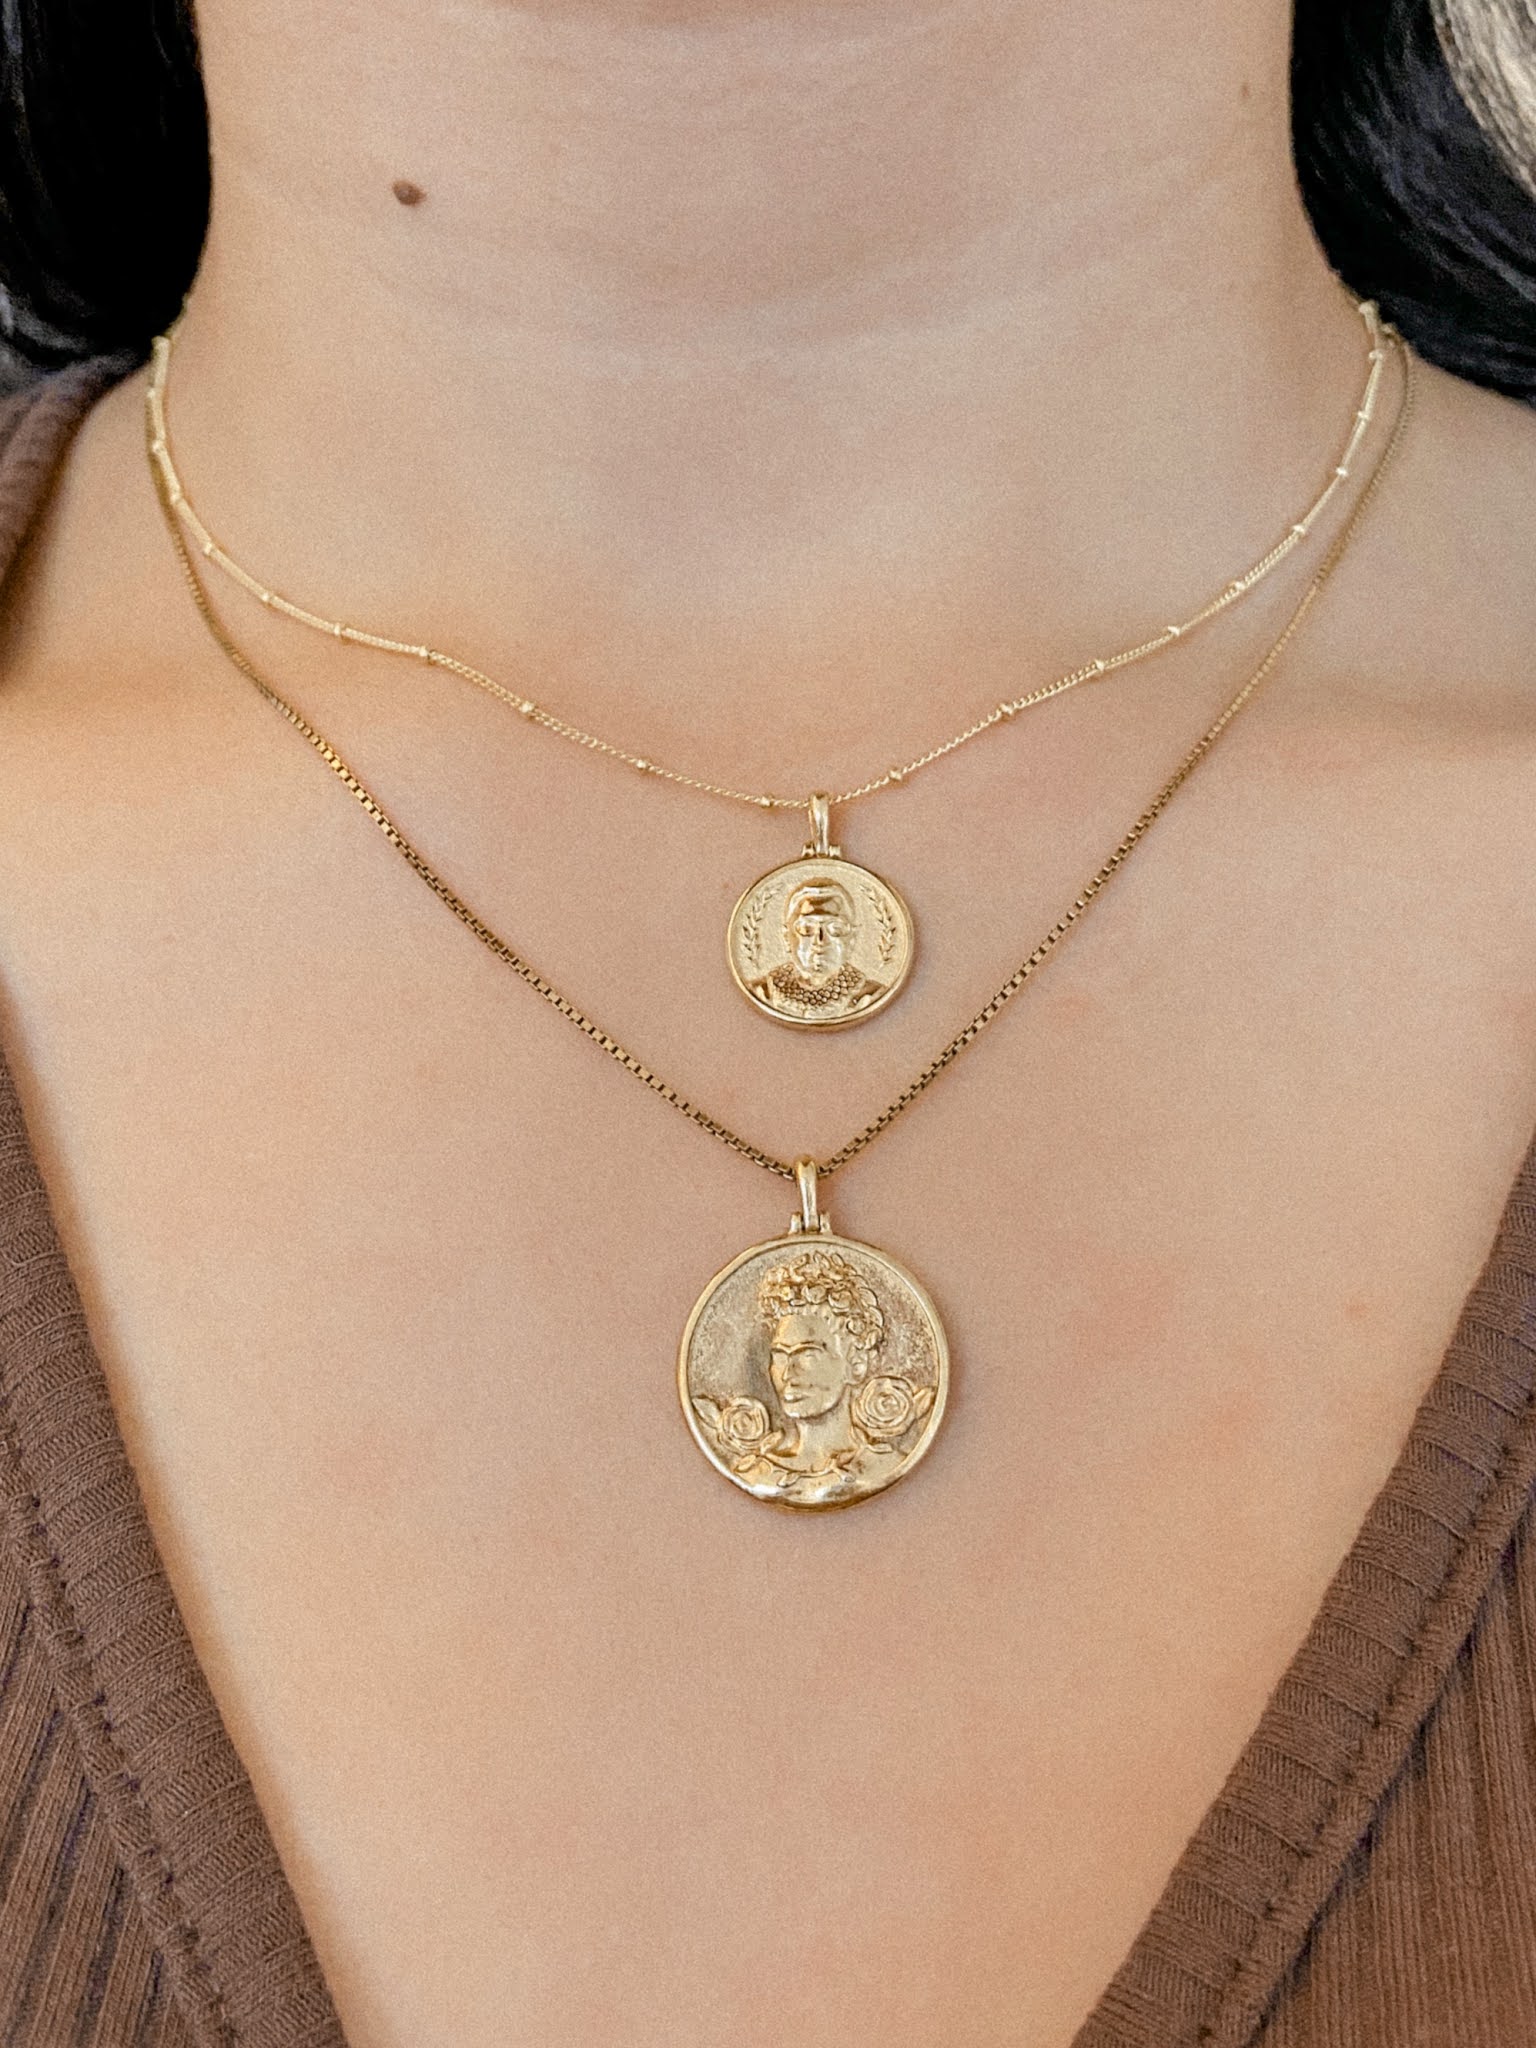 Goddess Coin Necklaces and Jewelry – Awe Inspired